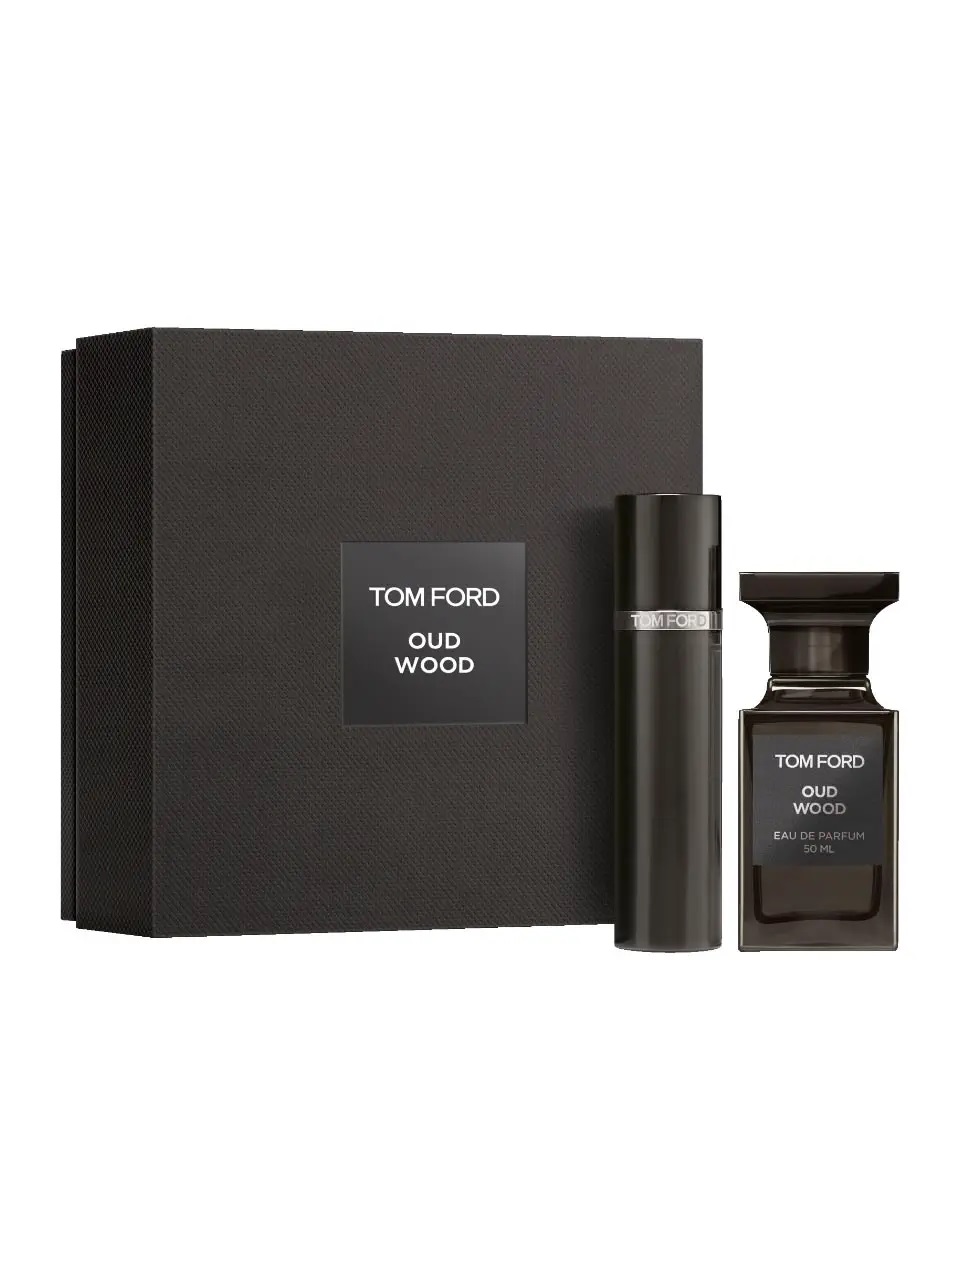 Tom Ford Private Blend Set